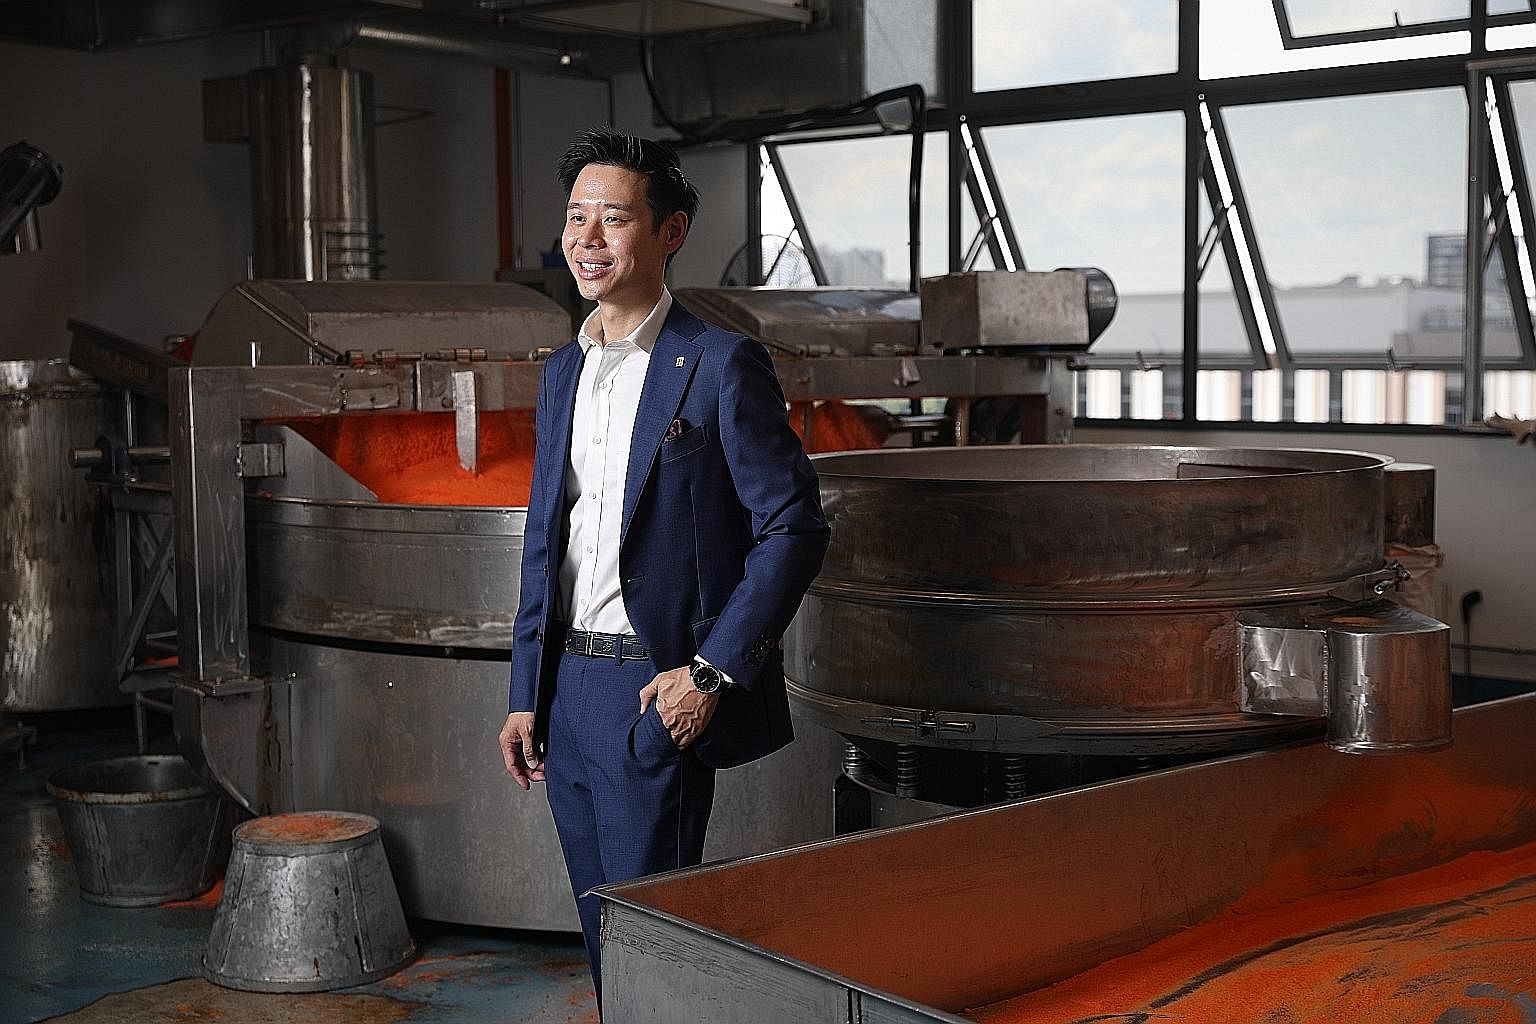 Cheng Yew Heng's third-generation business owner John Cheng left his banking job to help out in his family's 73-year-old traditional sugar-making business. His grandfather started the company in 1947, producing hawthorn, but in the 1950s, Mr Cheng's 